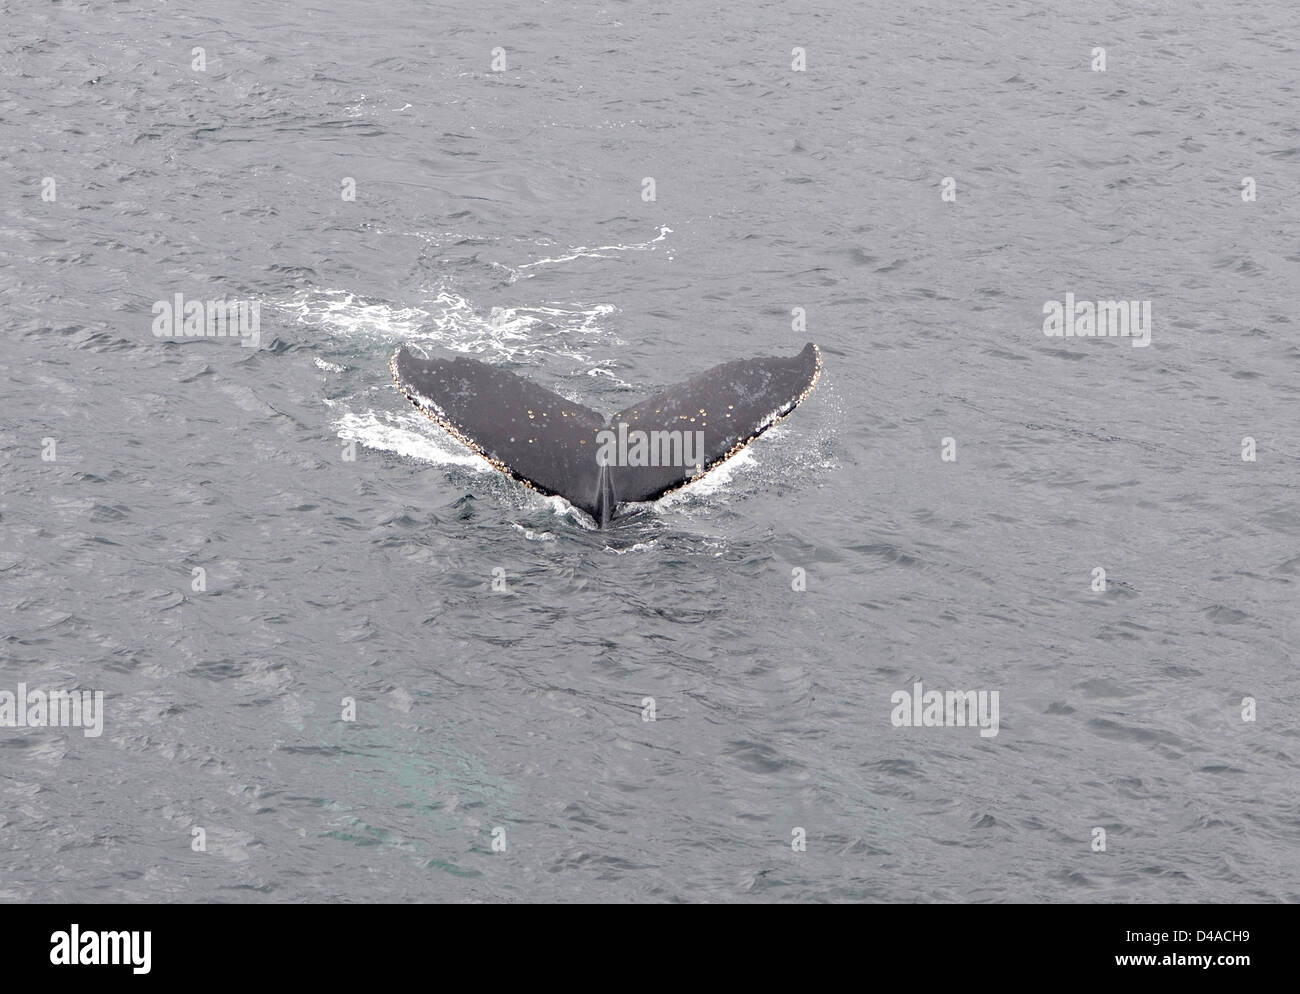 The topside of the tail of a humpback whale (Megaptera novaeangliae) as it dives.  Francisco Coloane Marine Park, Chile Stock Photo